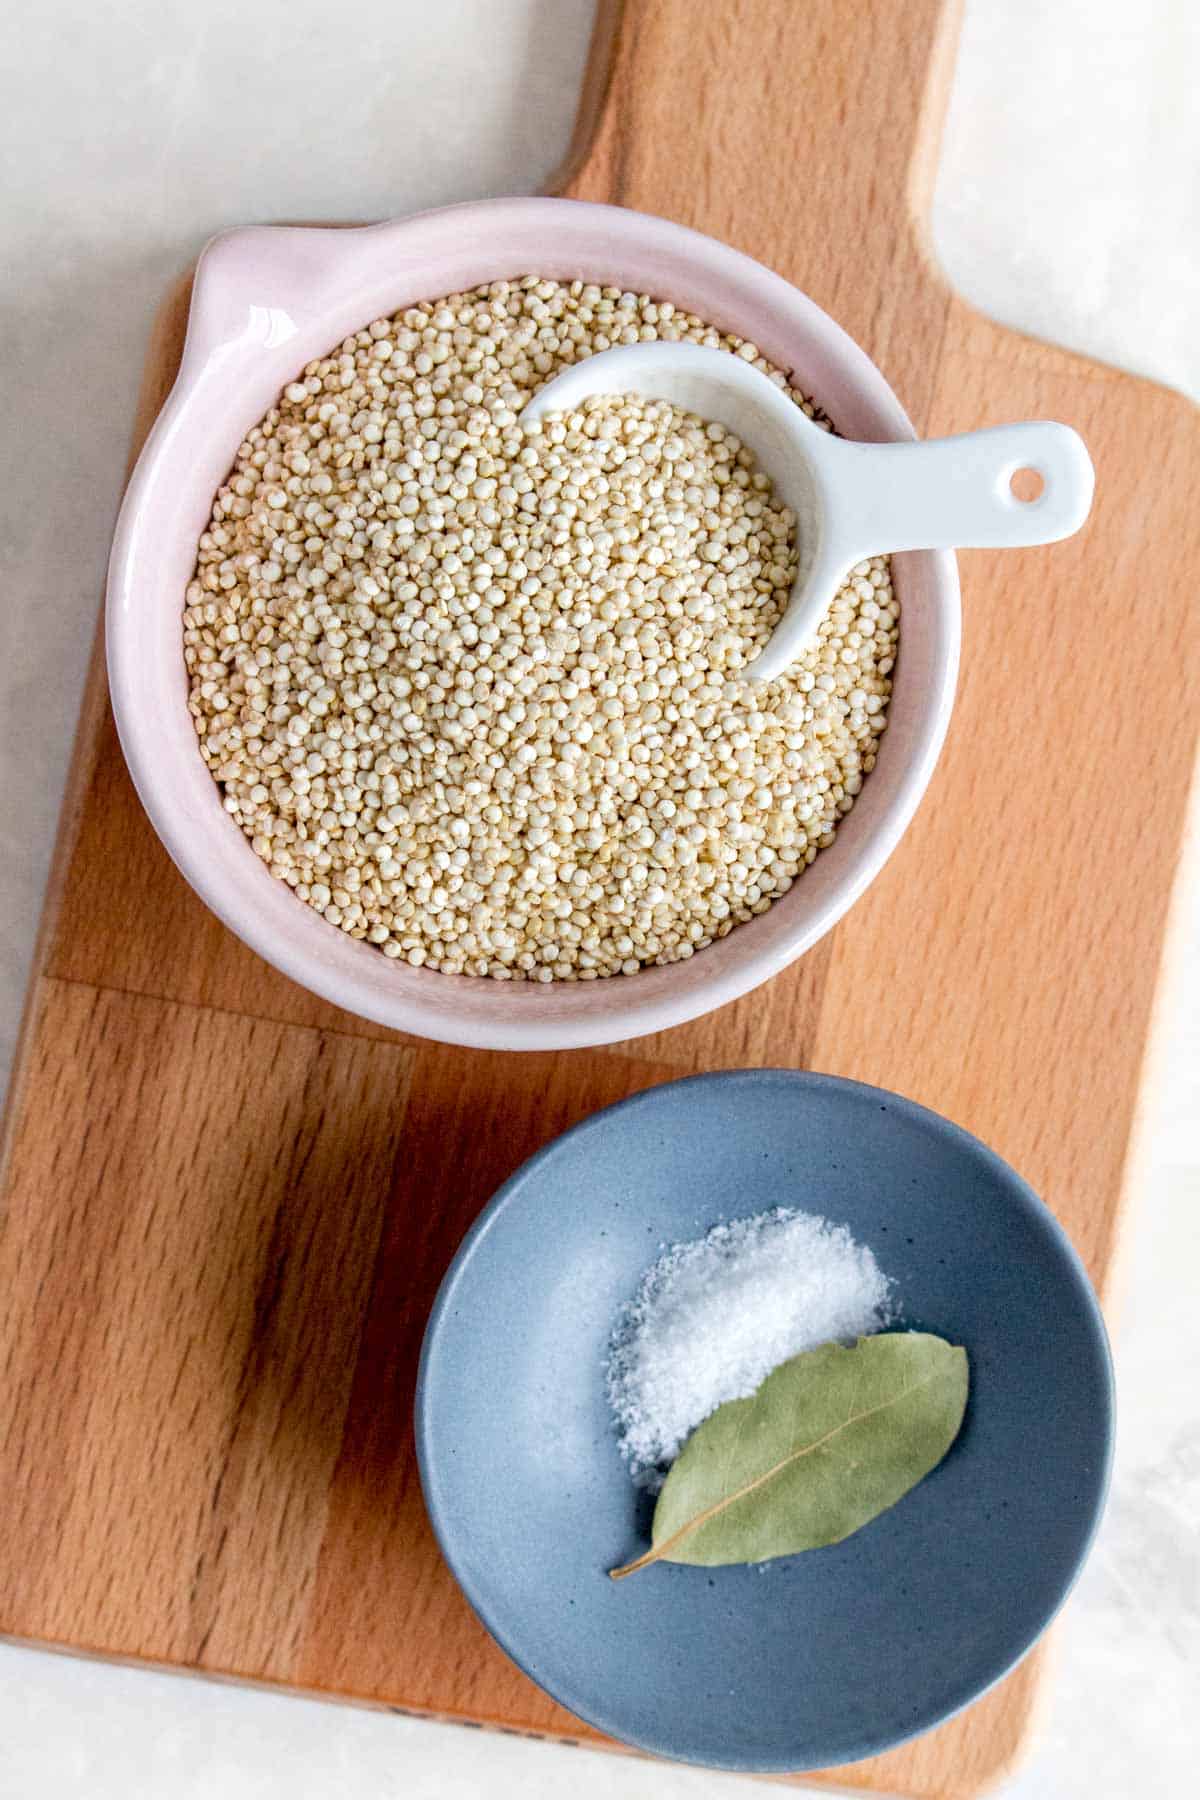 Ingredients needed to make quinoa in a rice cooker.